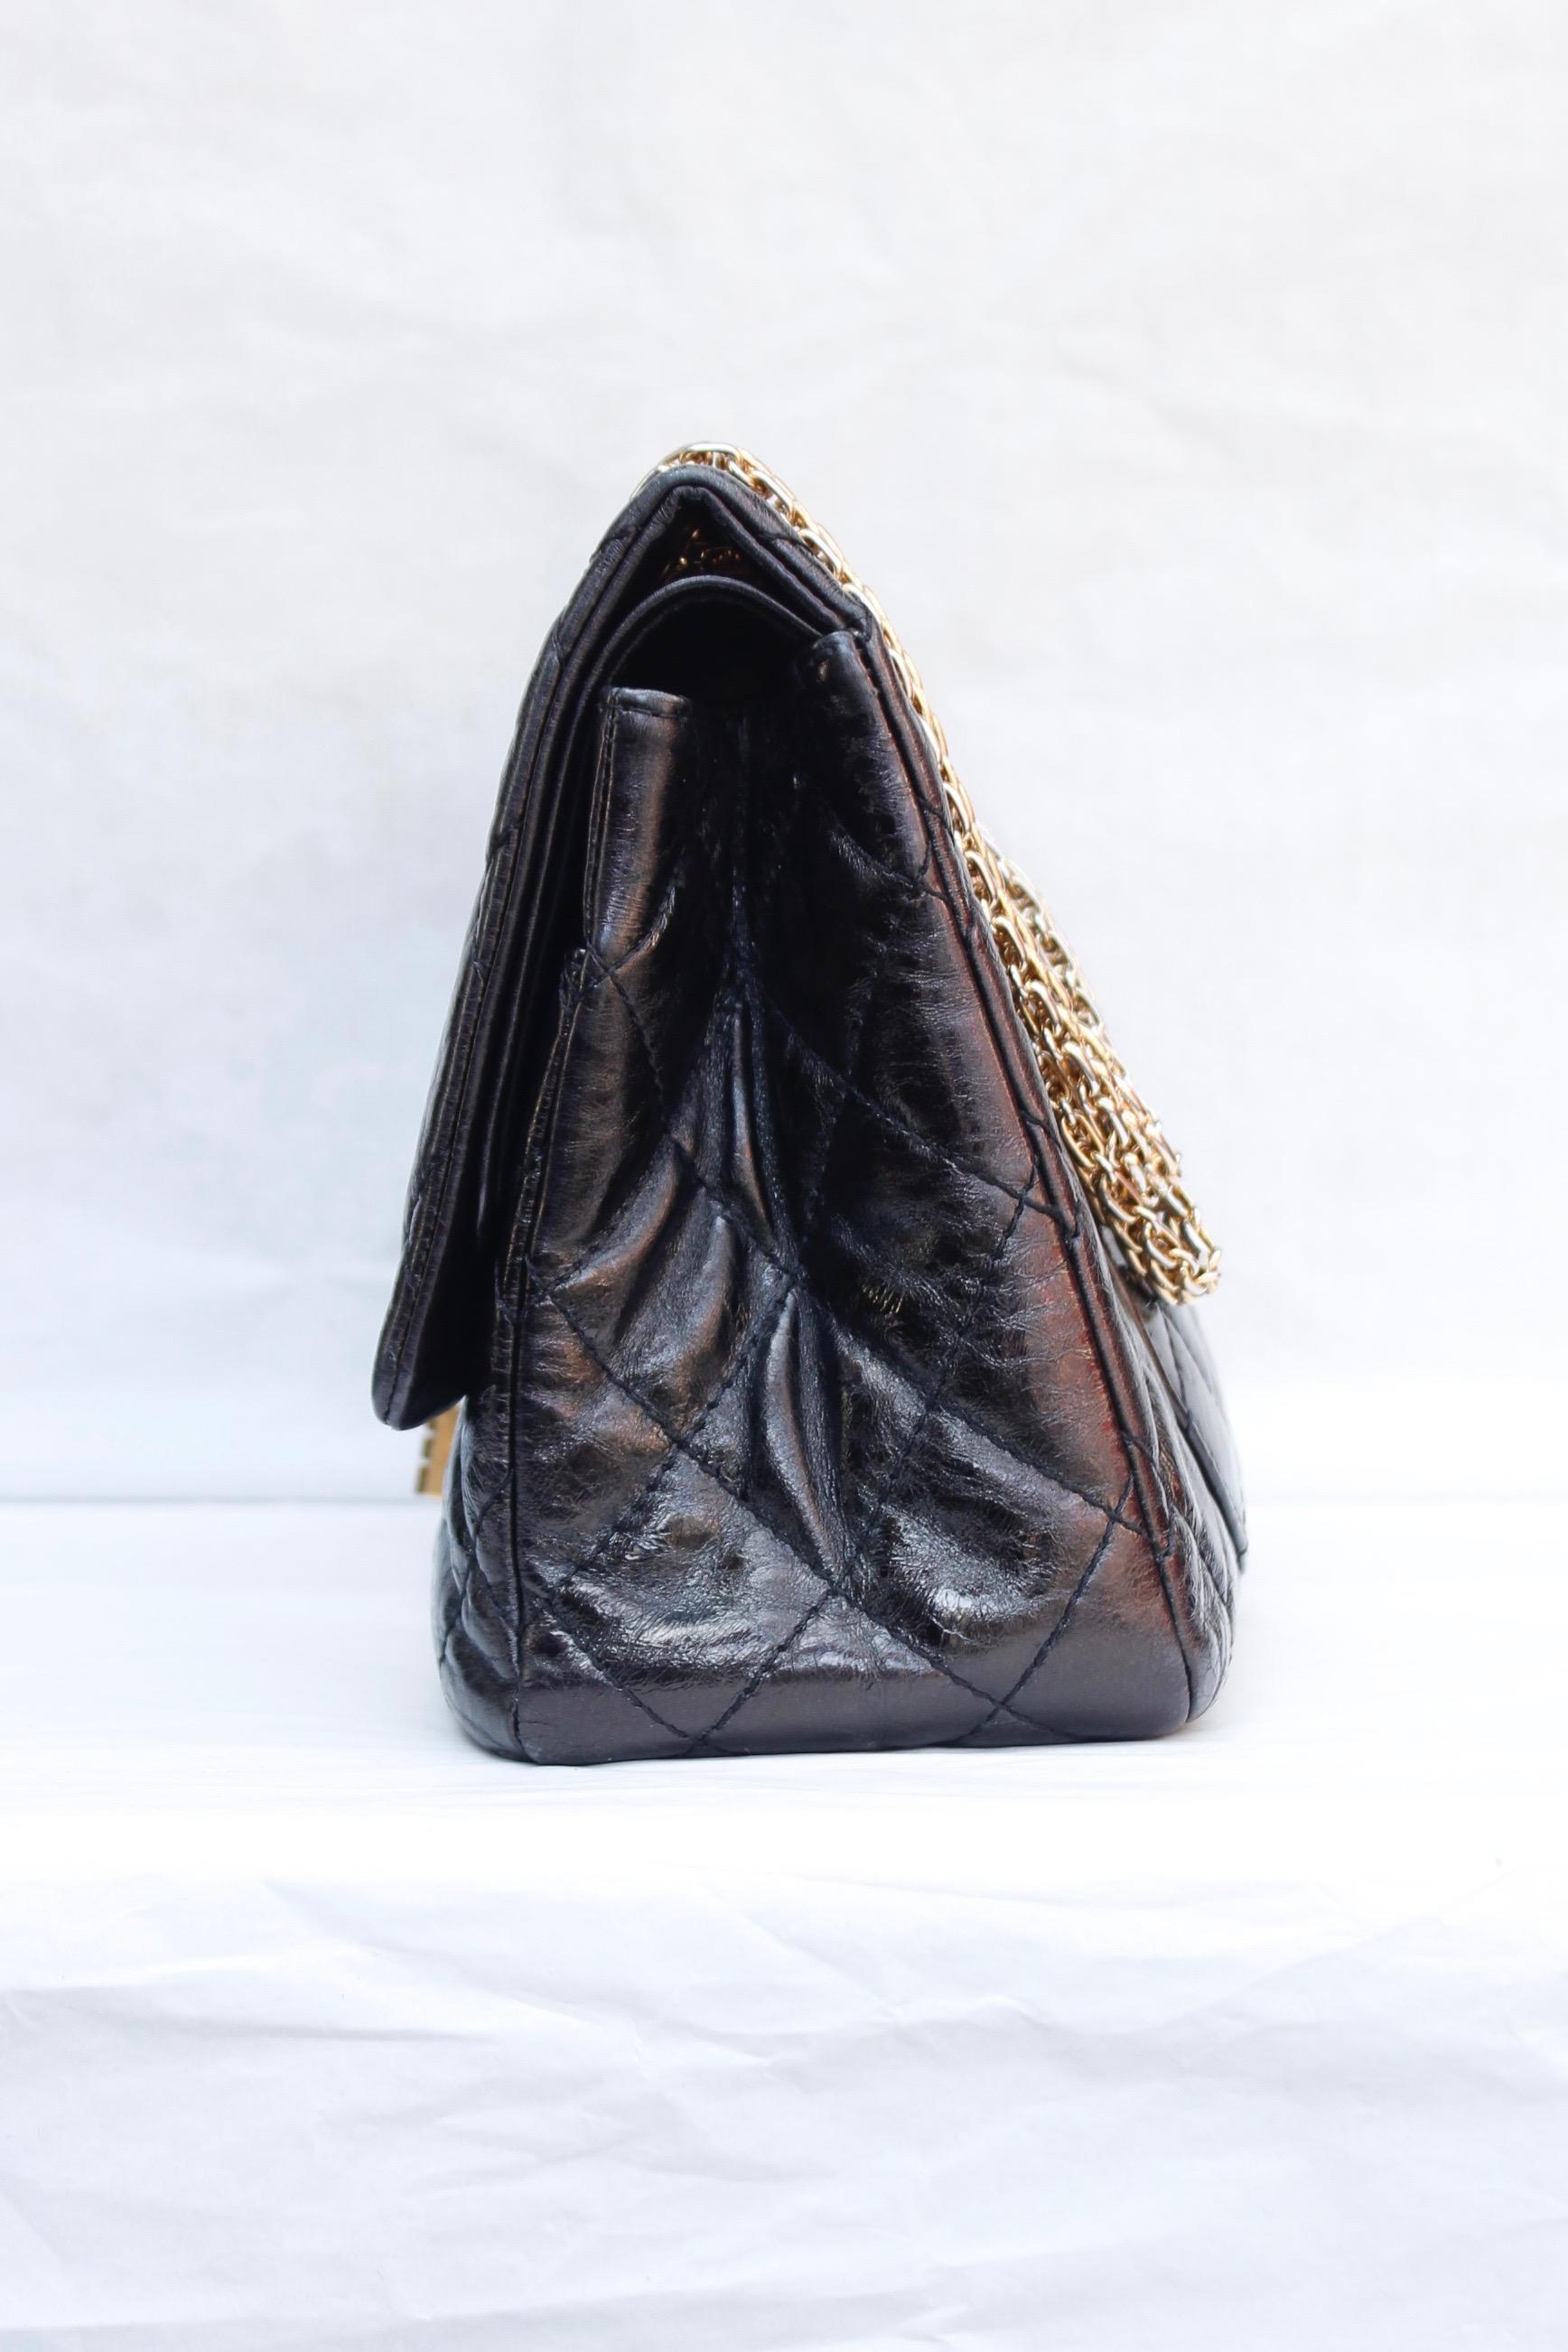 Black Chanel iconic cracked patent leather 2.55 bag, 2006/2008 For Sale